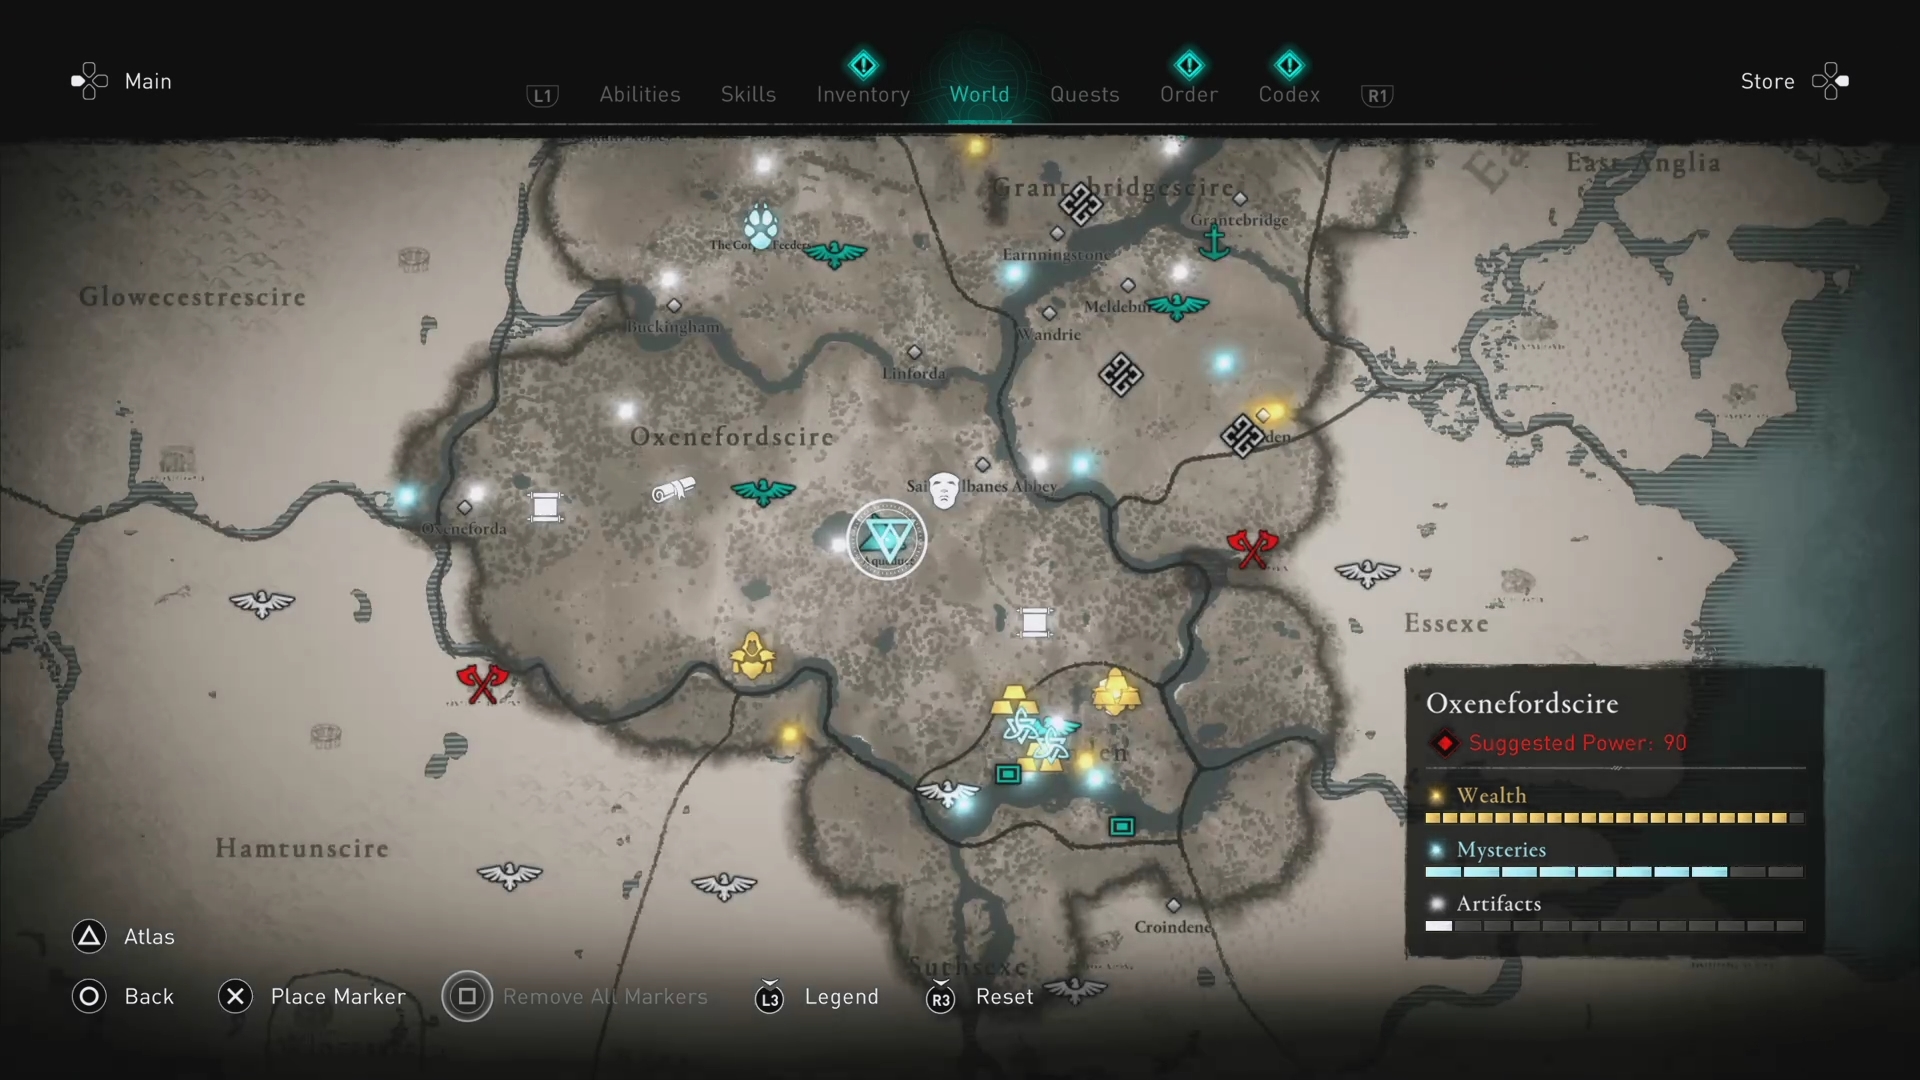 Assassin's Creed Valhalla interactive map to get the position of all items  - Millenium